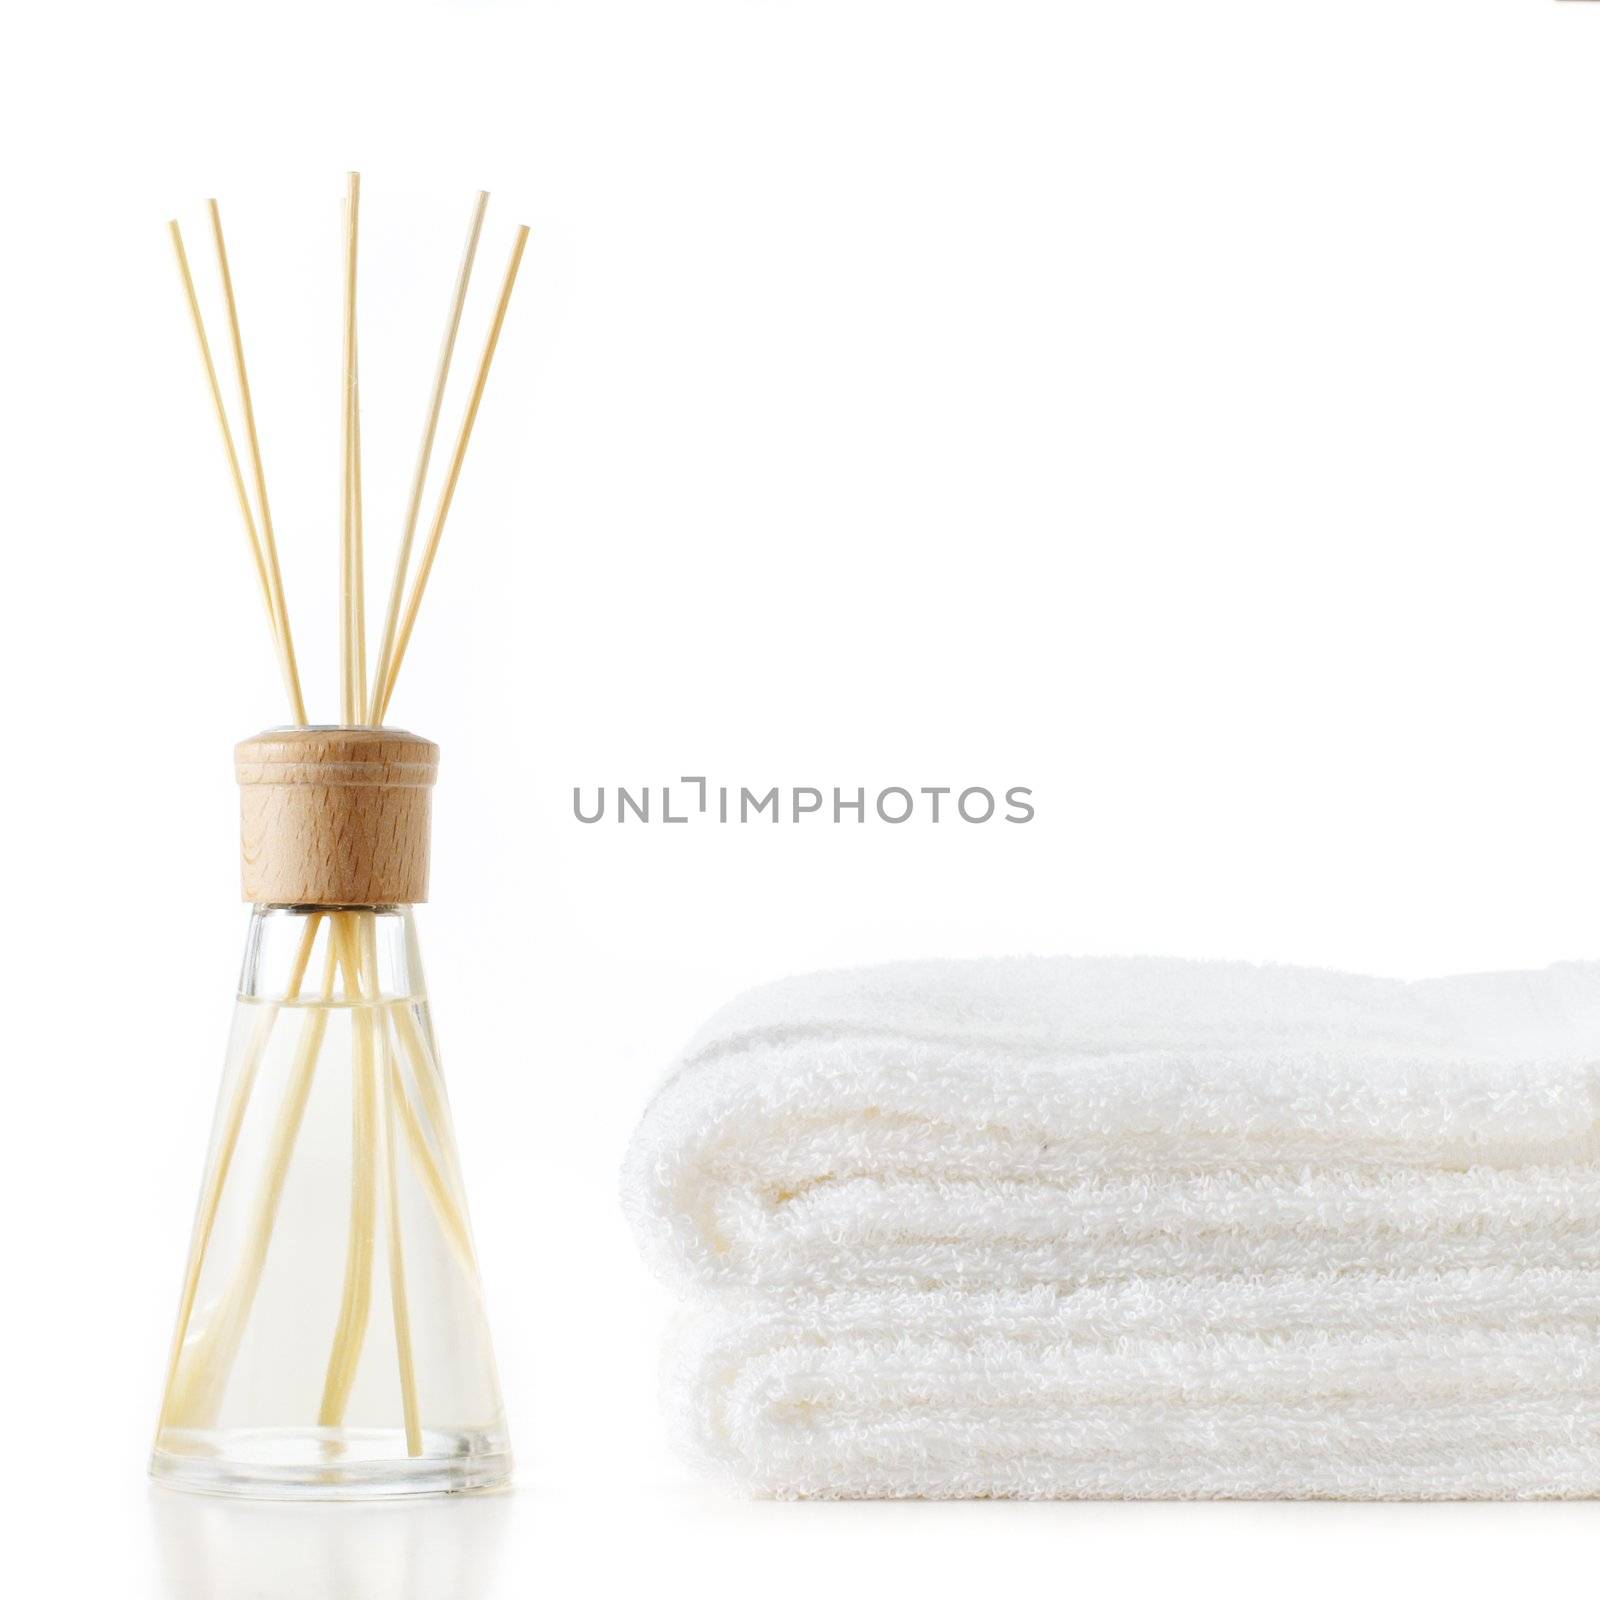 Diffuser and stack of towels against a white background.